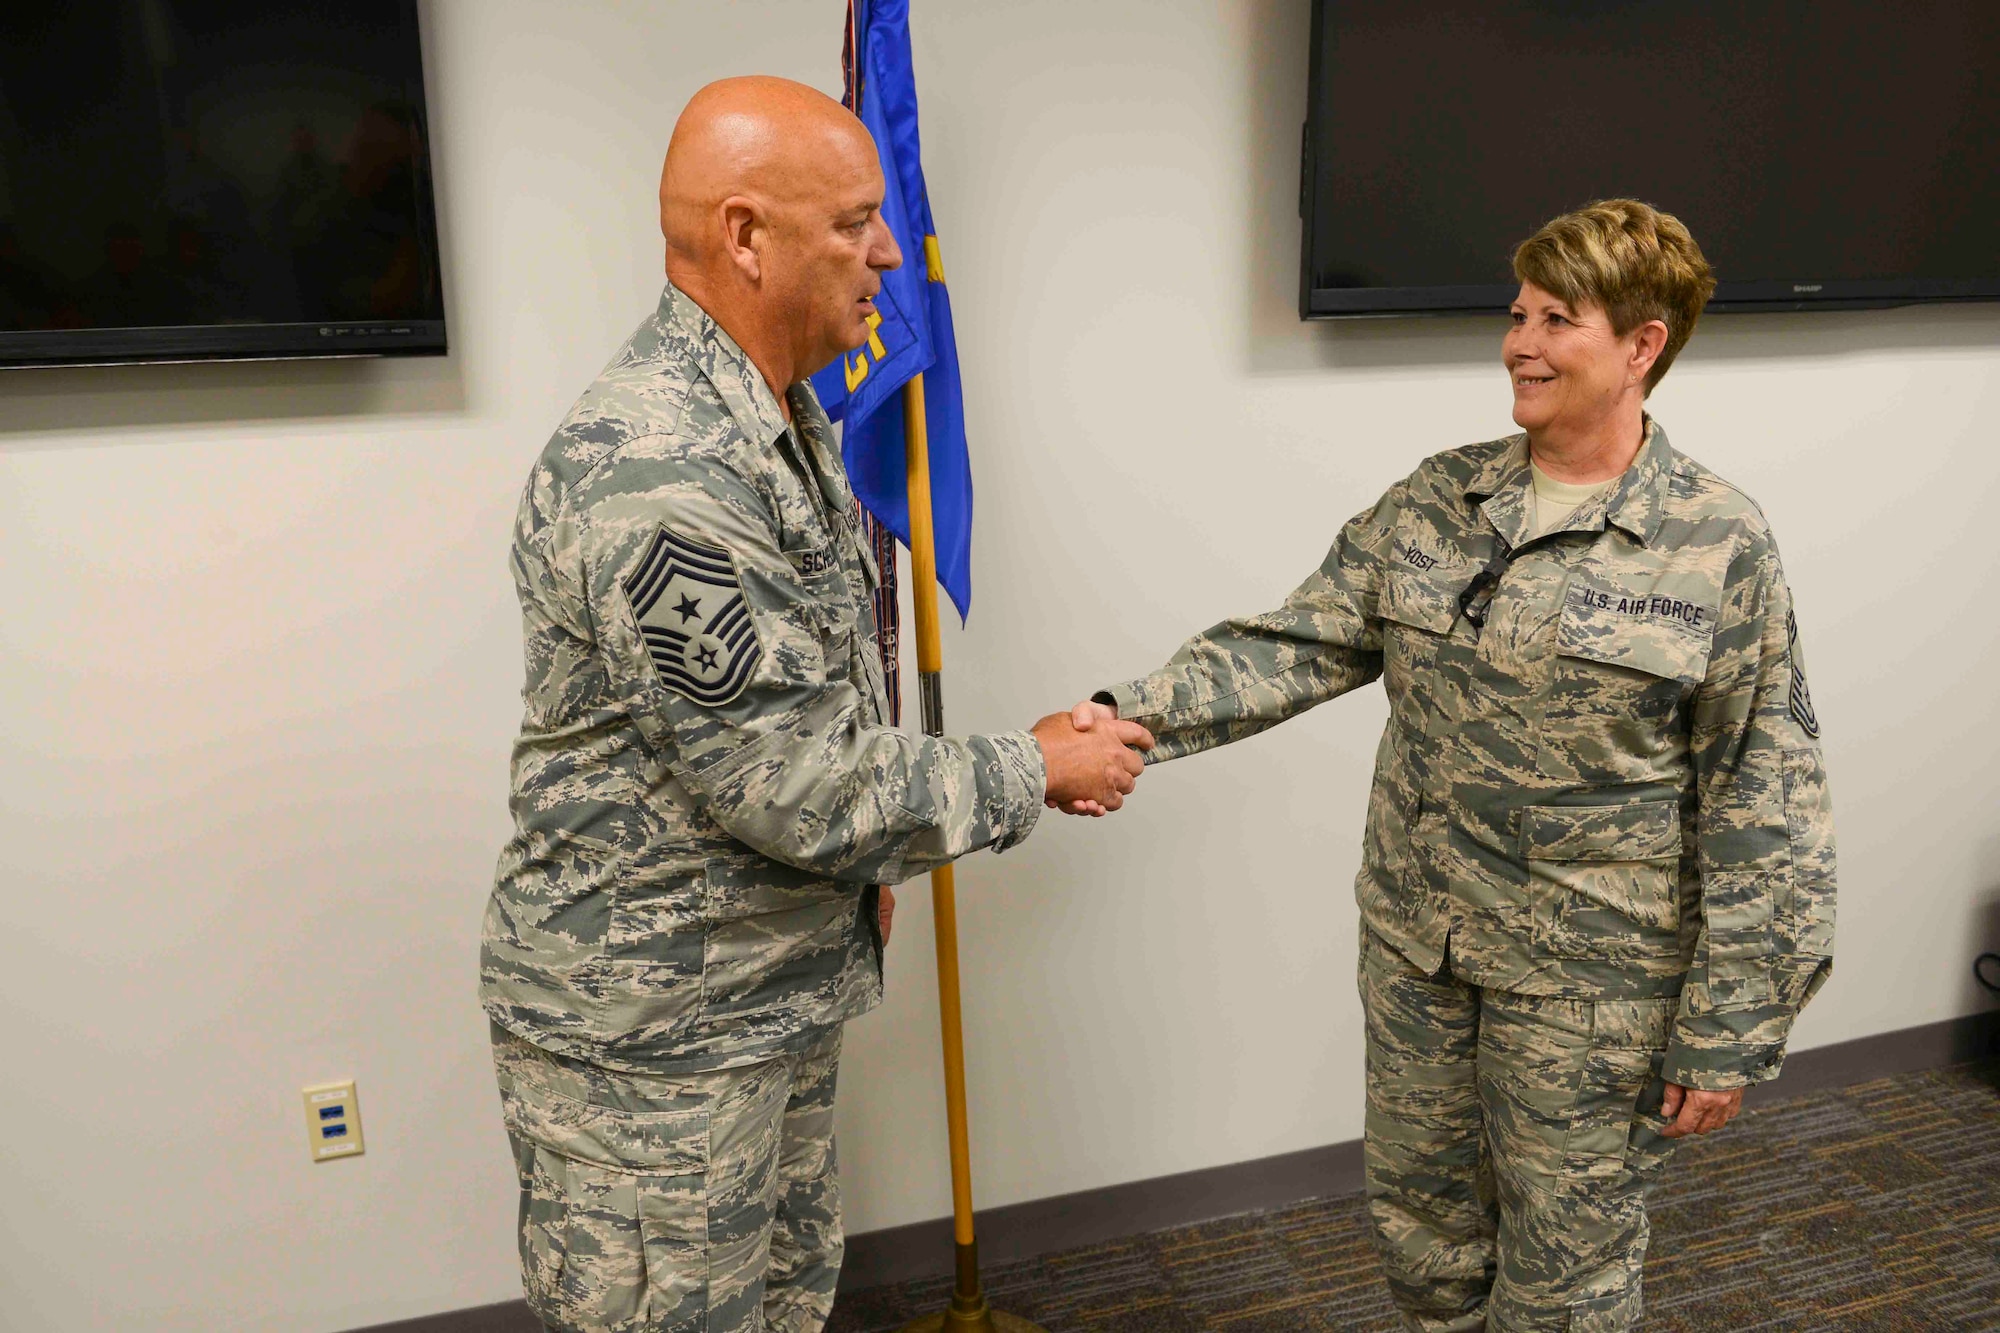 Command Chief Master Sergeant Ed Schellhase (left) presents his coin to theChief of Communications Flight, Chief Master Sergeant Michelle Yost (right) during roll call at the 132d Wing, Des Moines Iowa on Sunday, August 2, 2015.   (U.S. Air National Guard photo by Senior Airman Michael J. Kelly/Released)